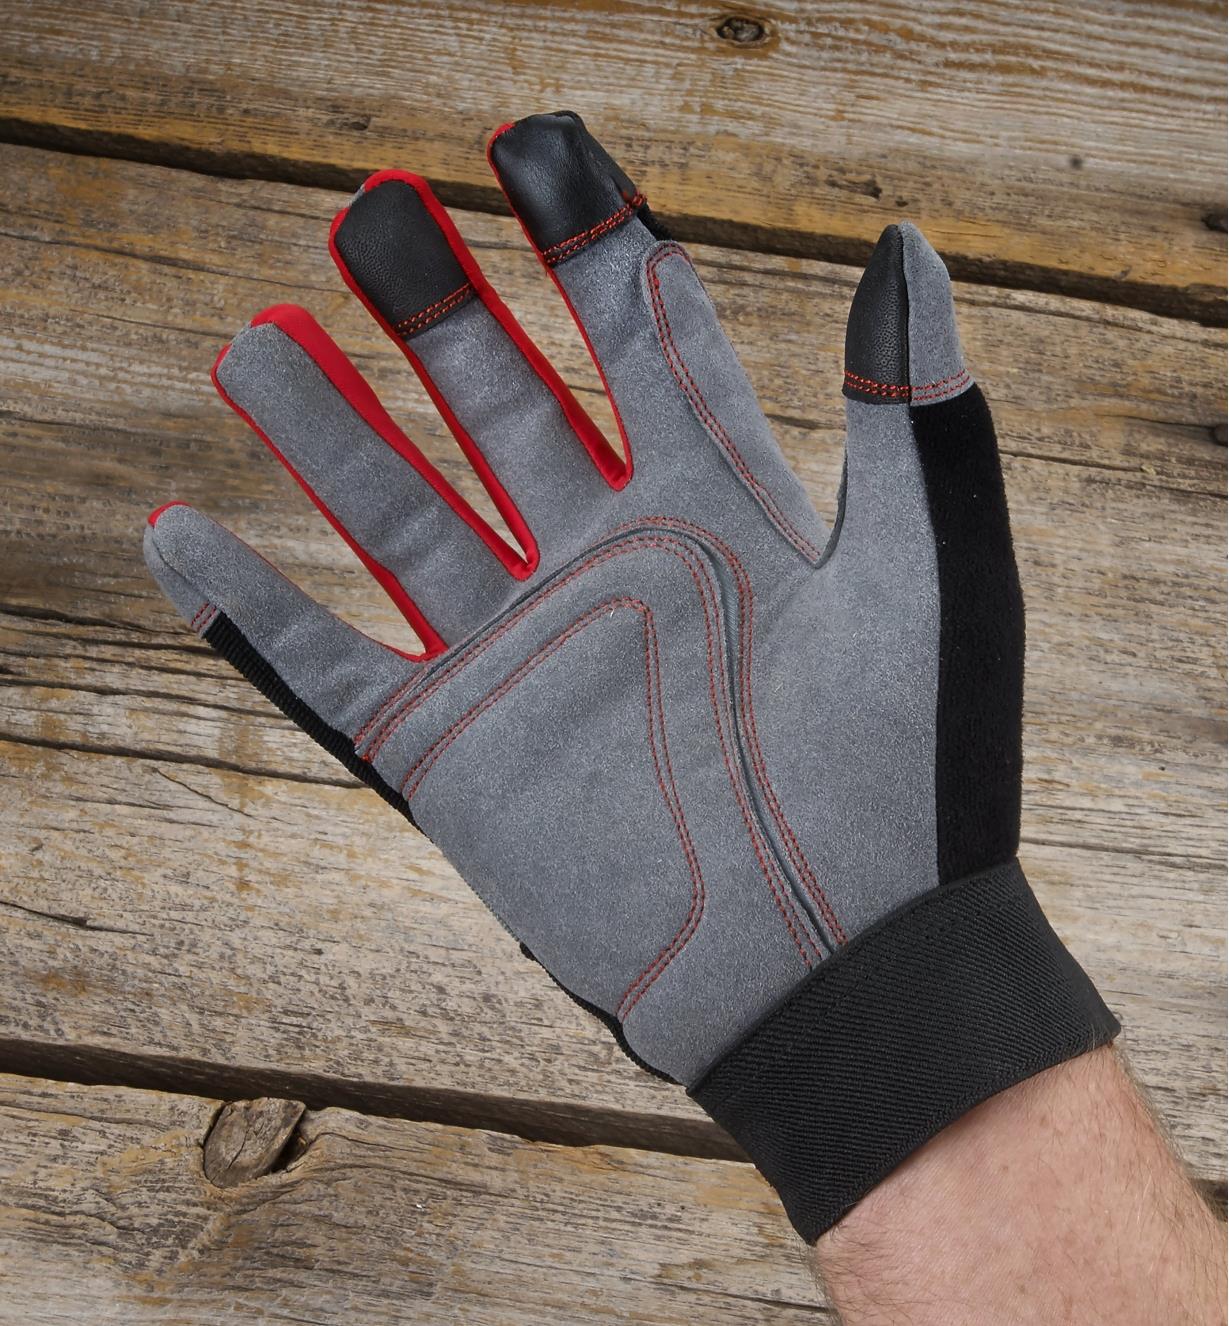 99W8471 - Ultra-Suede Gloves, 3 pairs